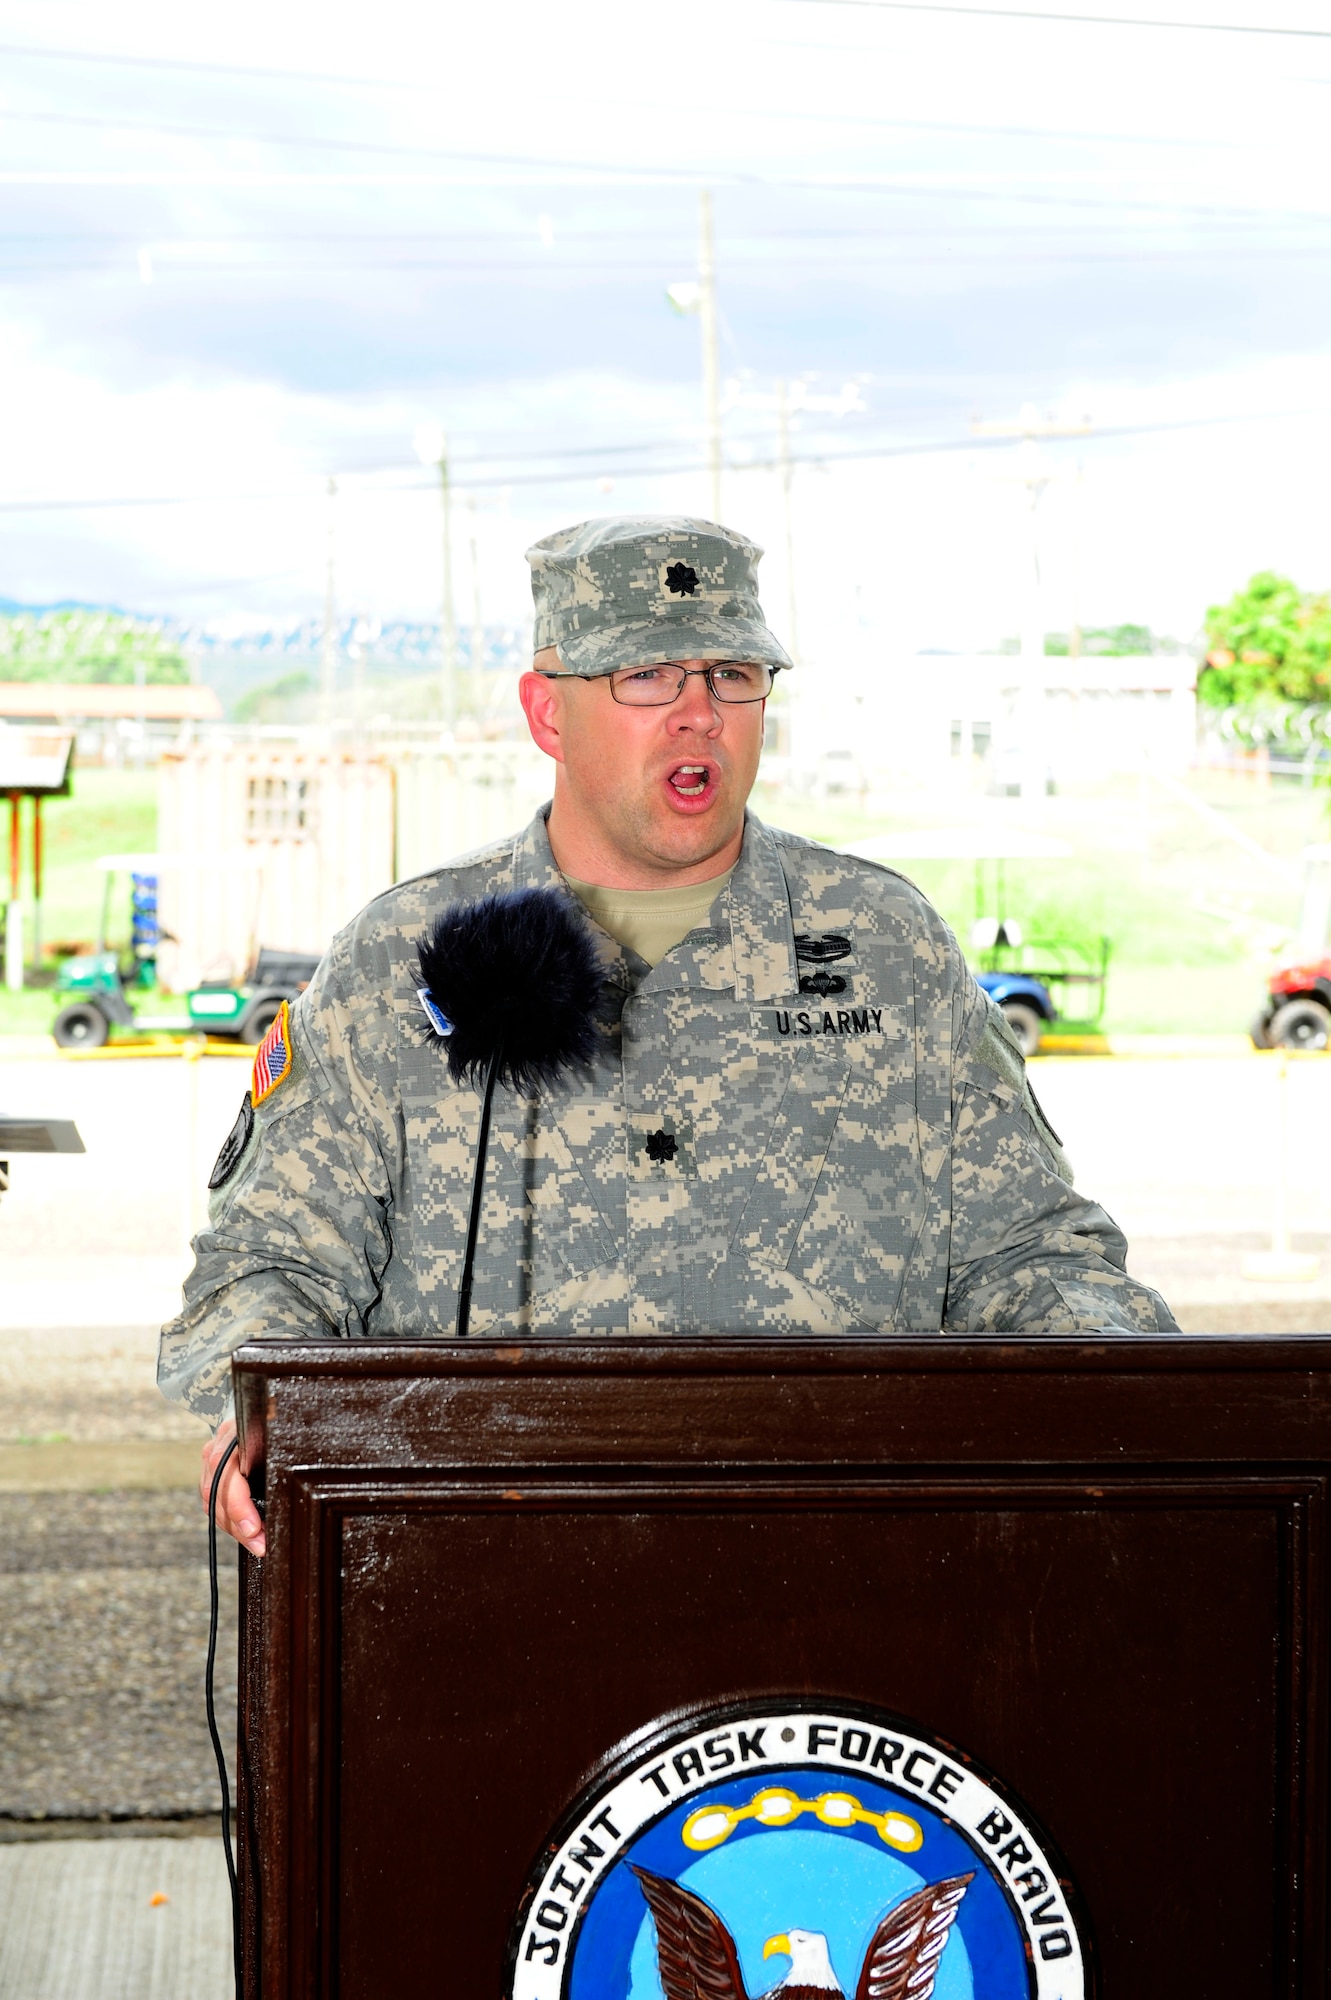 U. S. Army Lt. Col. Nicholas Dickson assumes command of the Army Forces Battalion at Soto Cano Air Base, Honduras by accepting the guidon from U. S. Army Col. Thomas Boccardi, the Joint Task Force-Bravo commander, June 16, 2014. Nicholson assumed command from outgoing commander U. S. Army Lt. Col. Alan McKewan. Army Forces Battalion is an expeditionary force ready to deploy as a resilient, integrated team capable of conducting administrative and logistical support for Joint Task Force-Bravo missions within Central America in order to counter illicit trafficking, support foreign humanitarian assistance/disaster relief and build partner nation capacity.  (Photo by Martin Chahin)